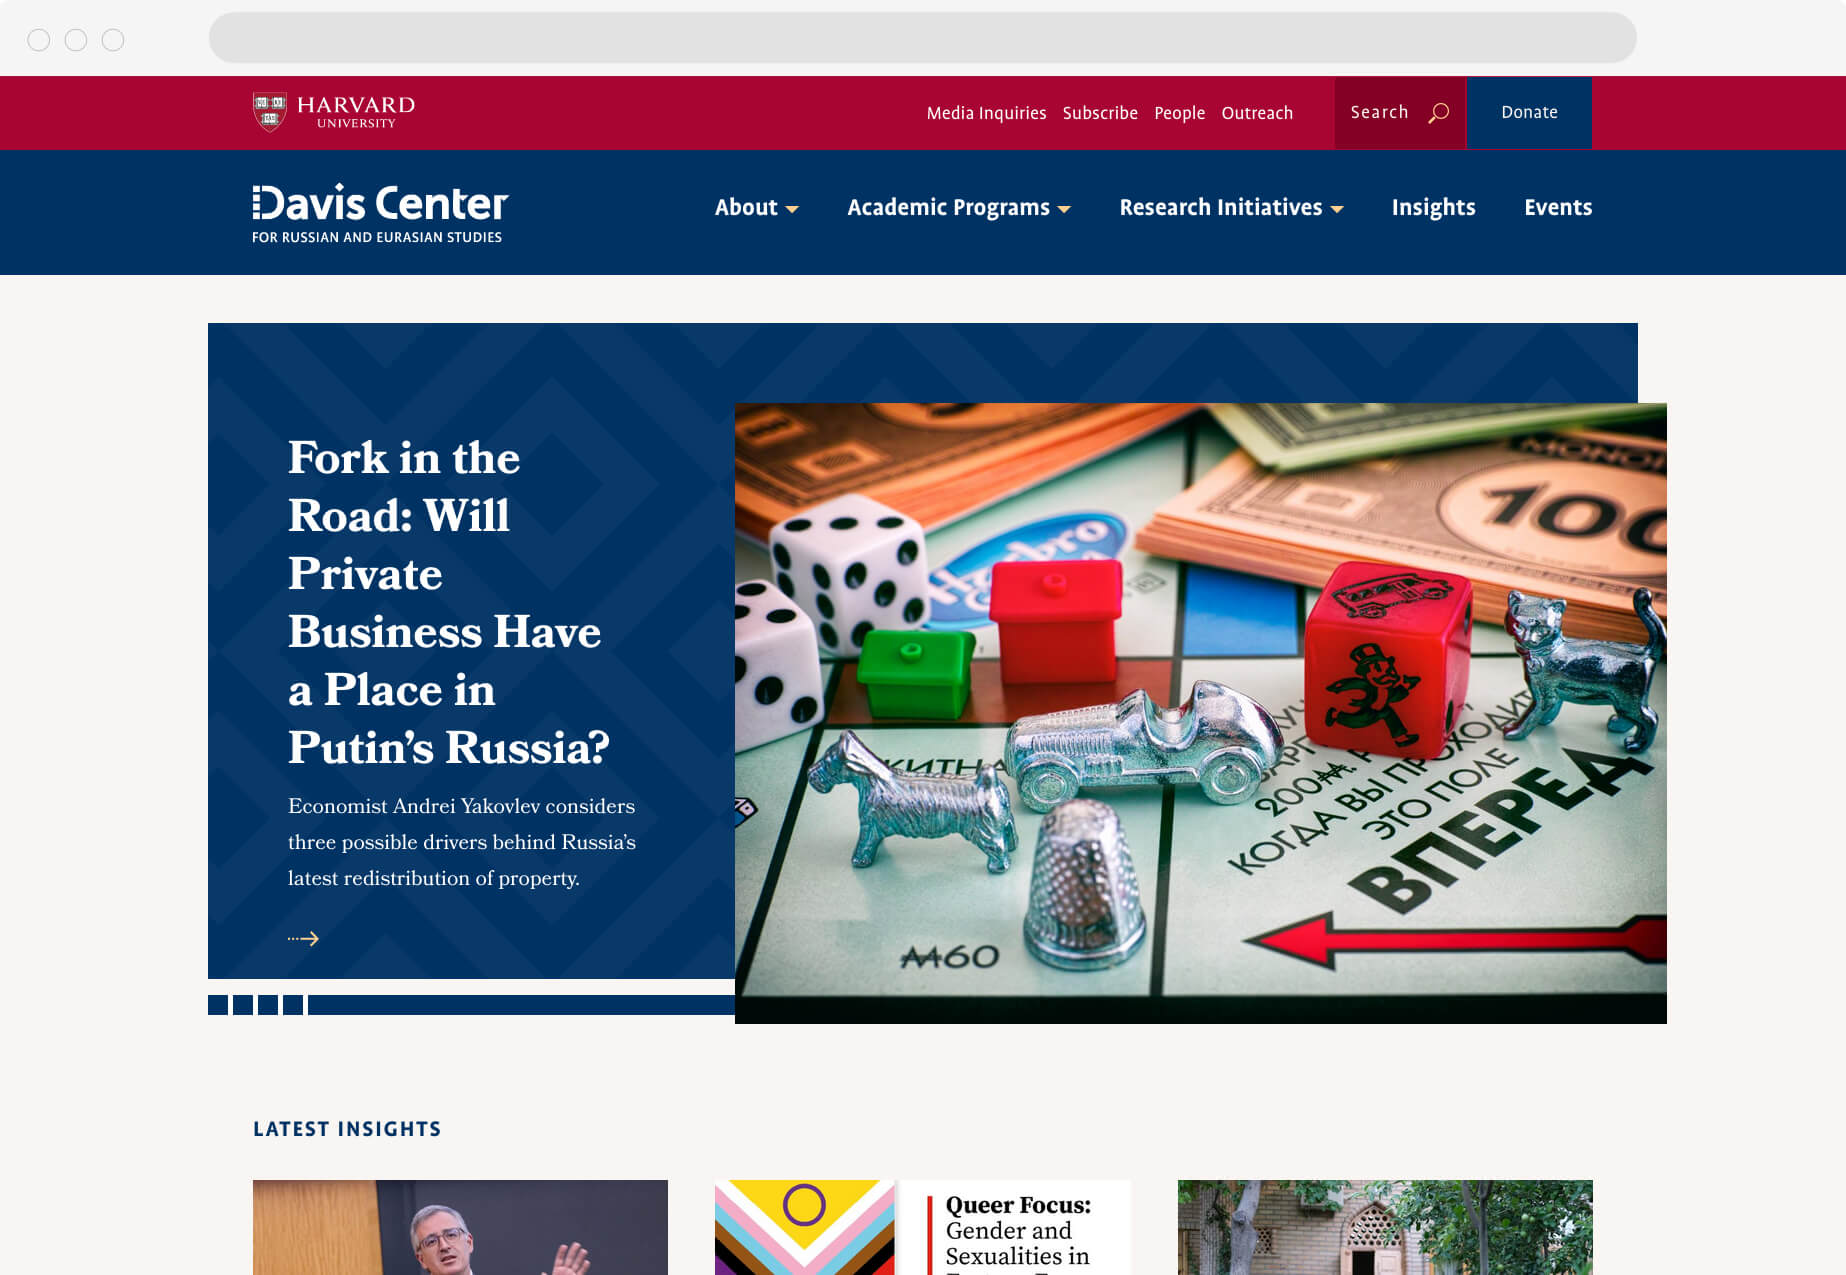 A homepage snapshot for the Davis Center with hero text "Fork in the road: will private business have a place in Putin's Russia?" next to a close up image of a Monopoly game board.